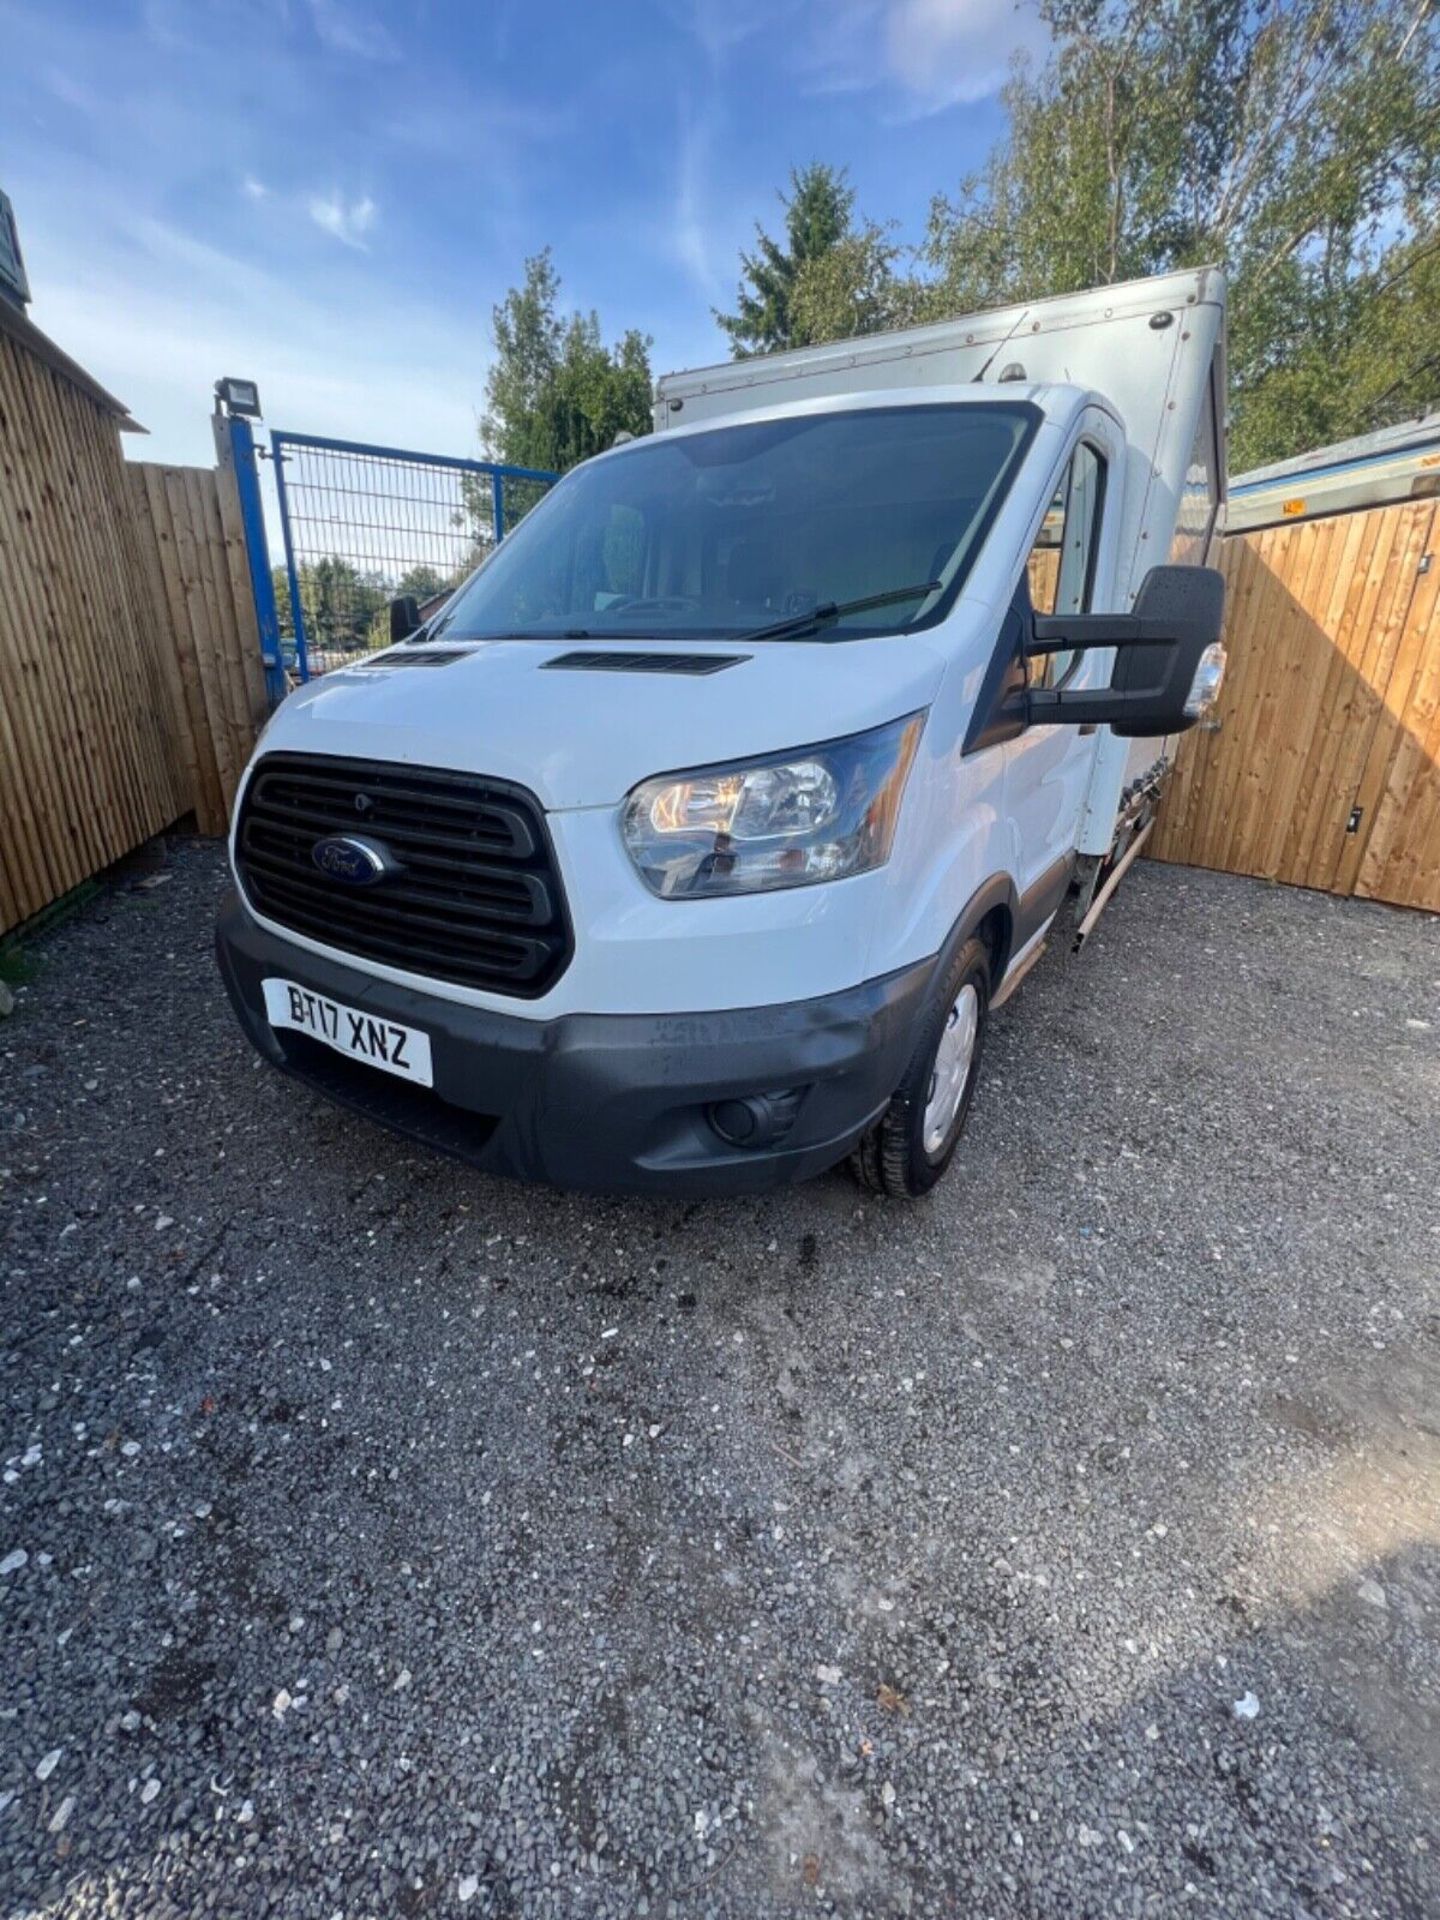 FORD TRANSIT BOX VAN 2017 LUTON EURO6 LWB 6 SPEED MANUAL 1COMPANY OWNER FROM NEW - Image 3 of 15